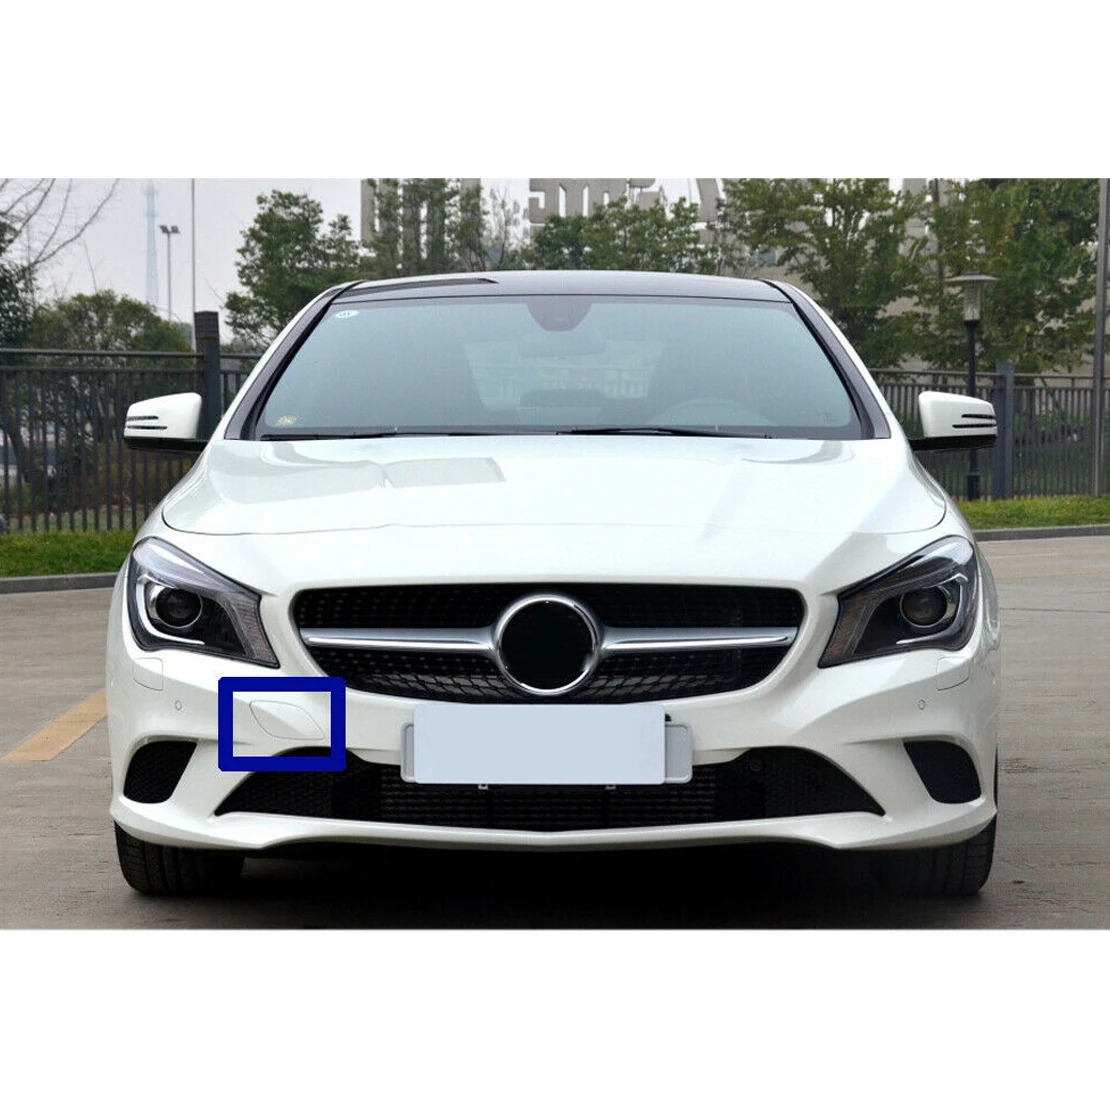 W117 CLA 200/220/250 2014-2016 1178850622 beler Front Bumper Tow Eye Hook Cover Cap Fit for Mercedes-Benz CLA C117 Coupe 2013-2016 